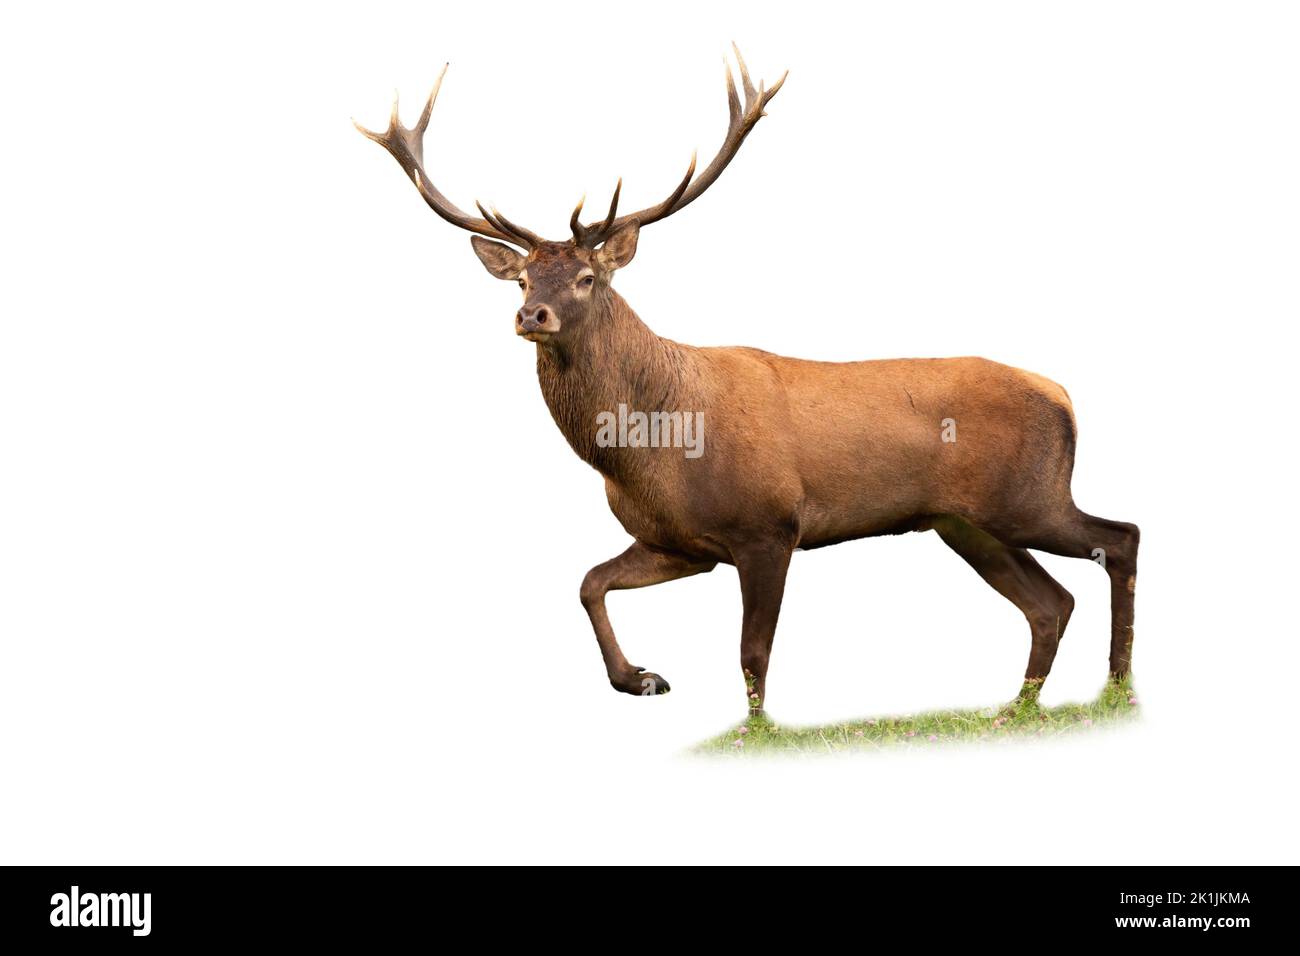 Red deer stag walking on a meadow isolated on white background Stock Photo